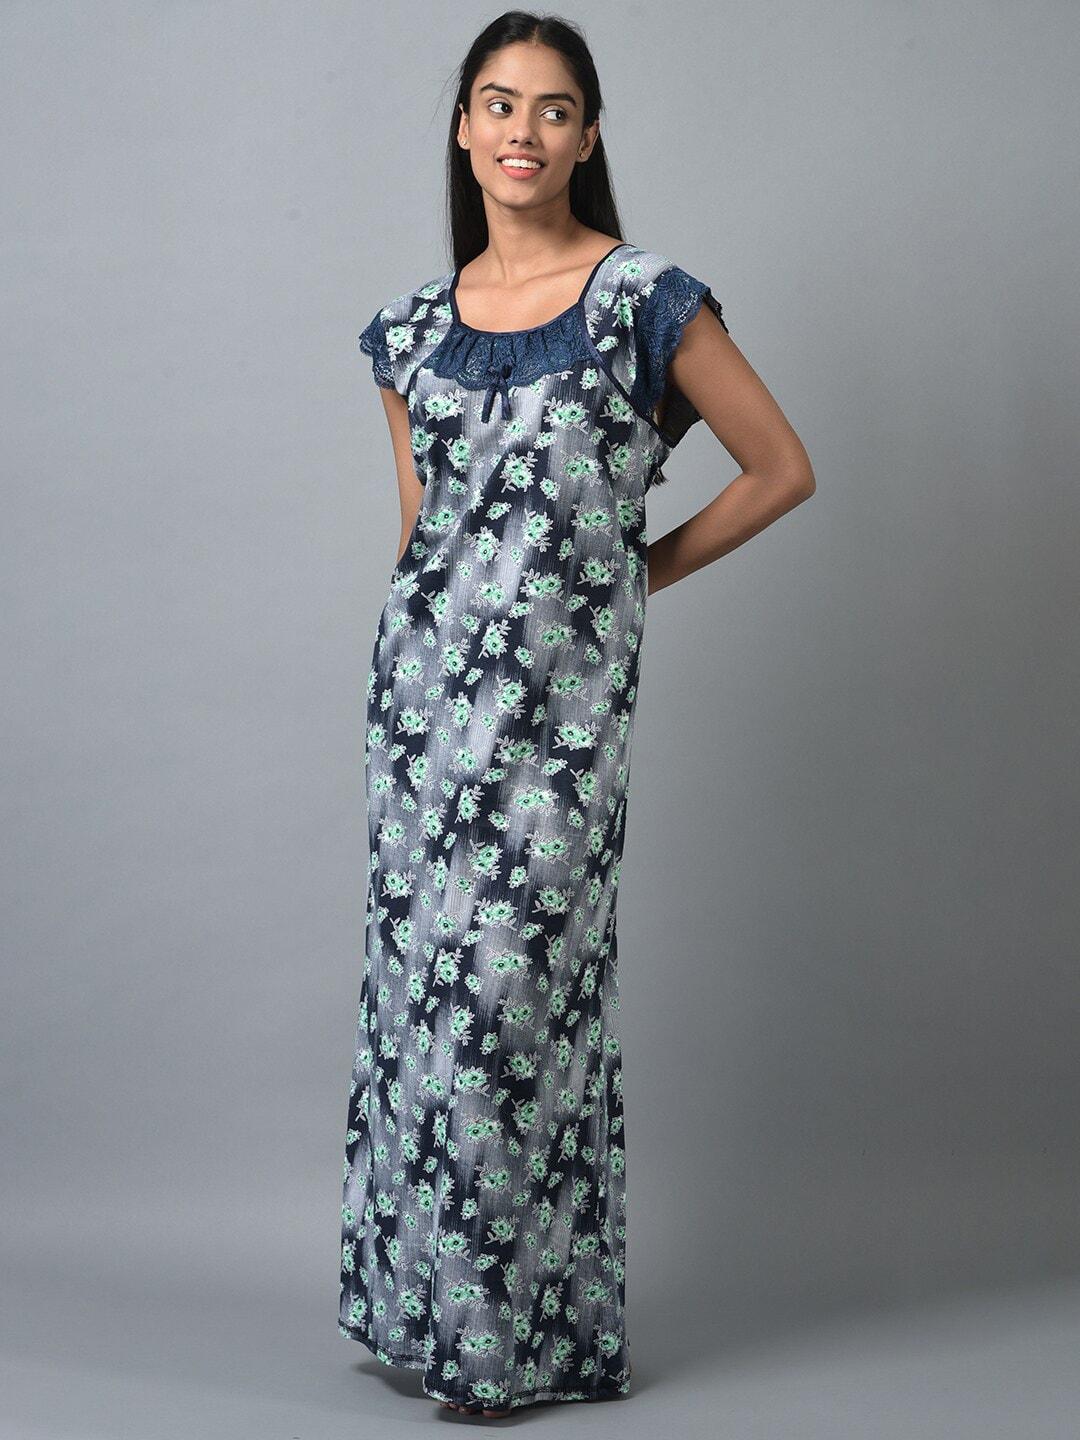 noty-floral-printed-lace-insert-maxi-nightdress